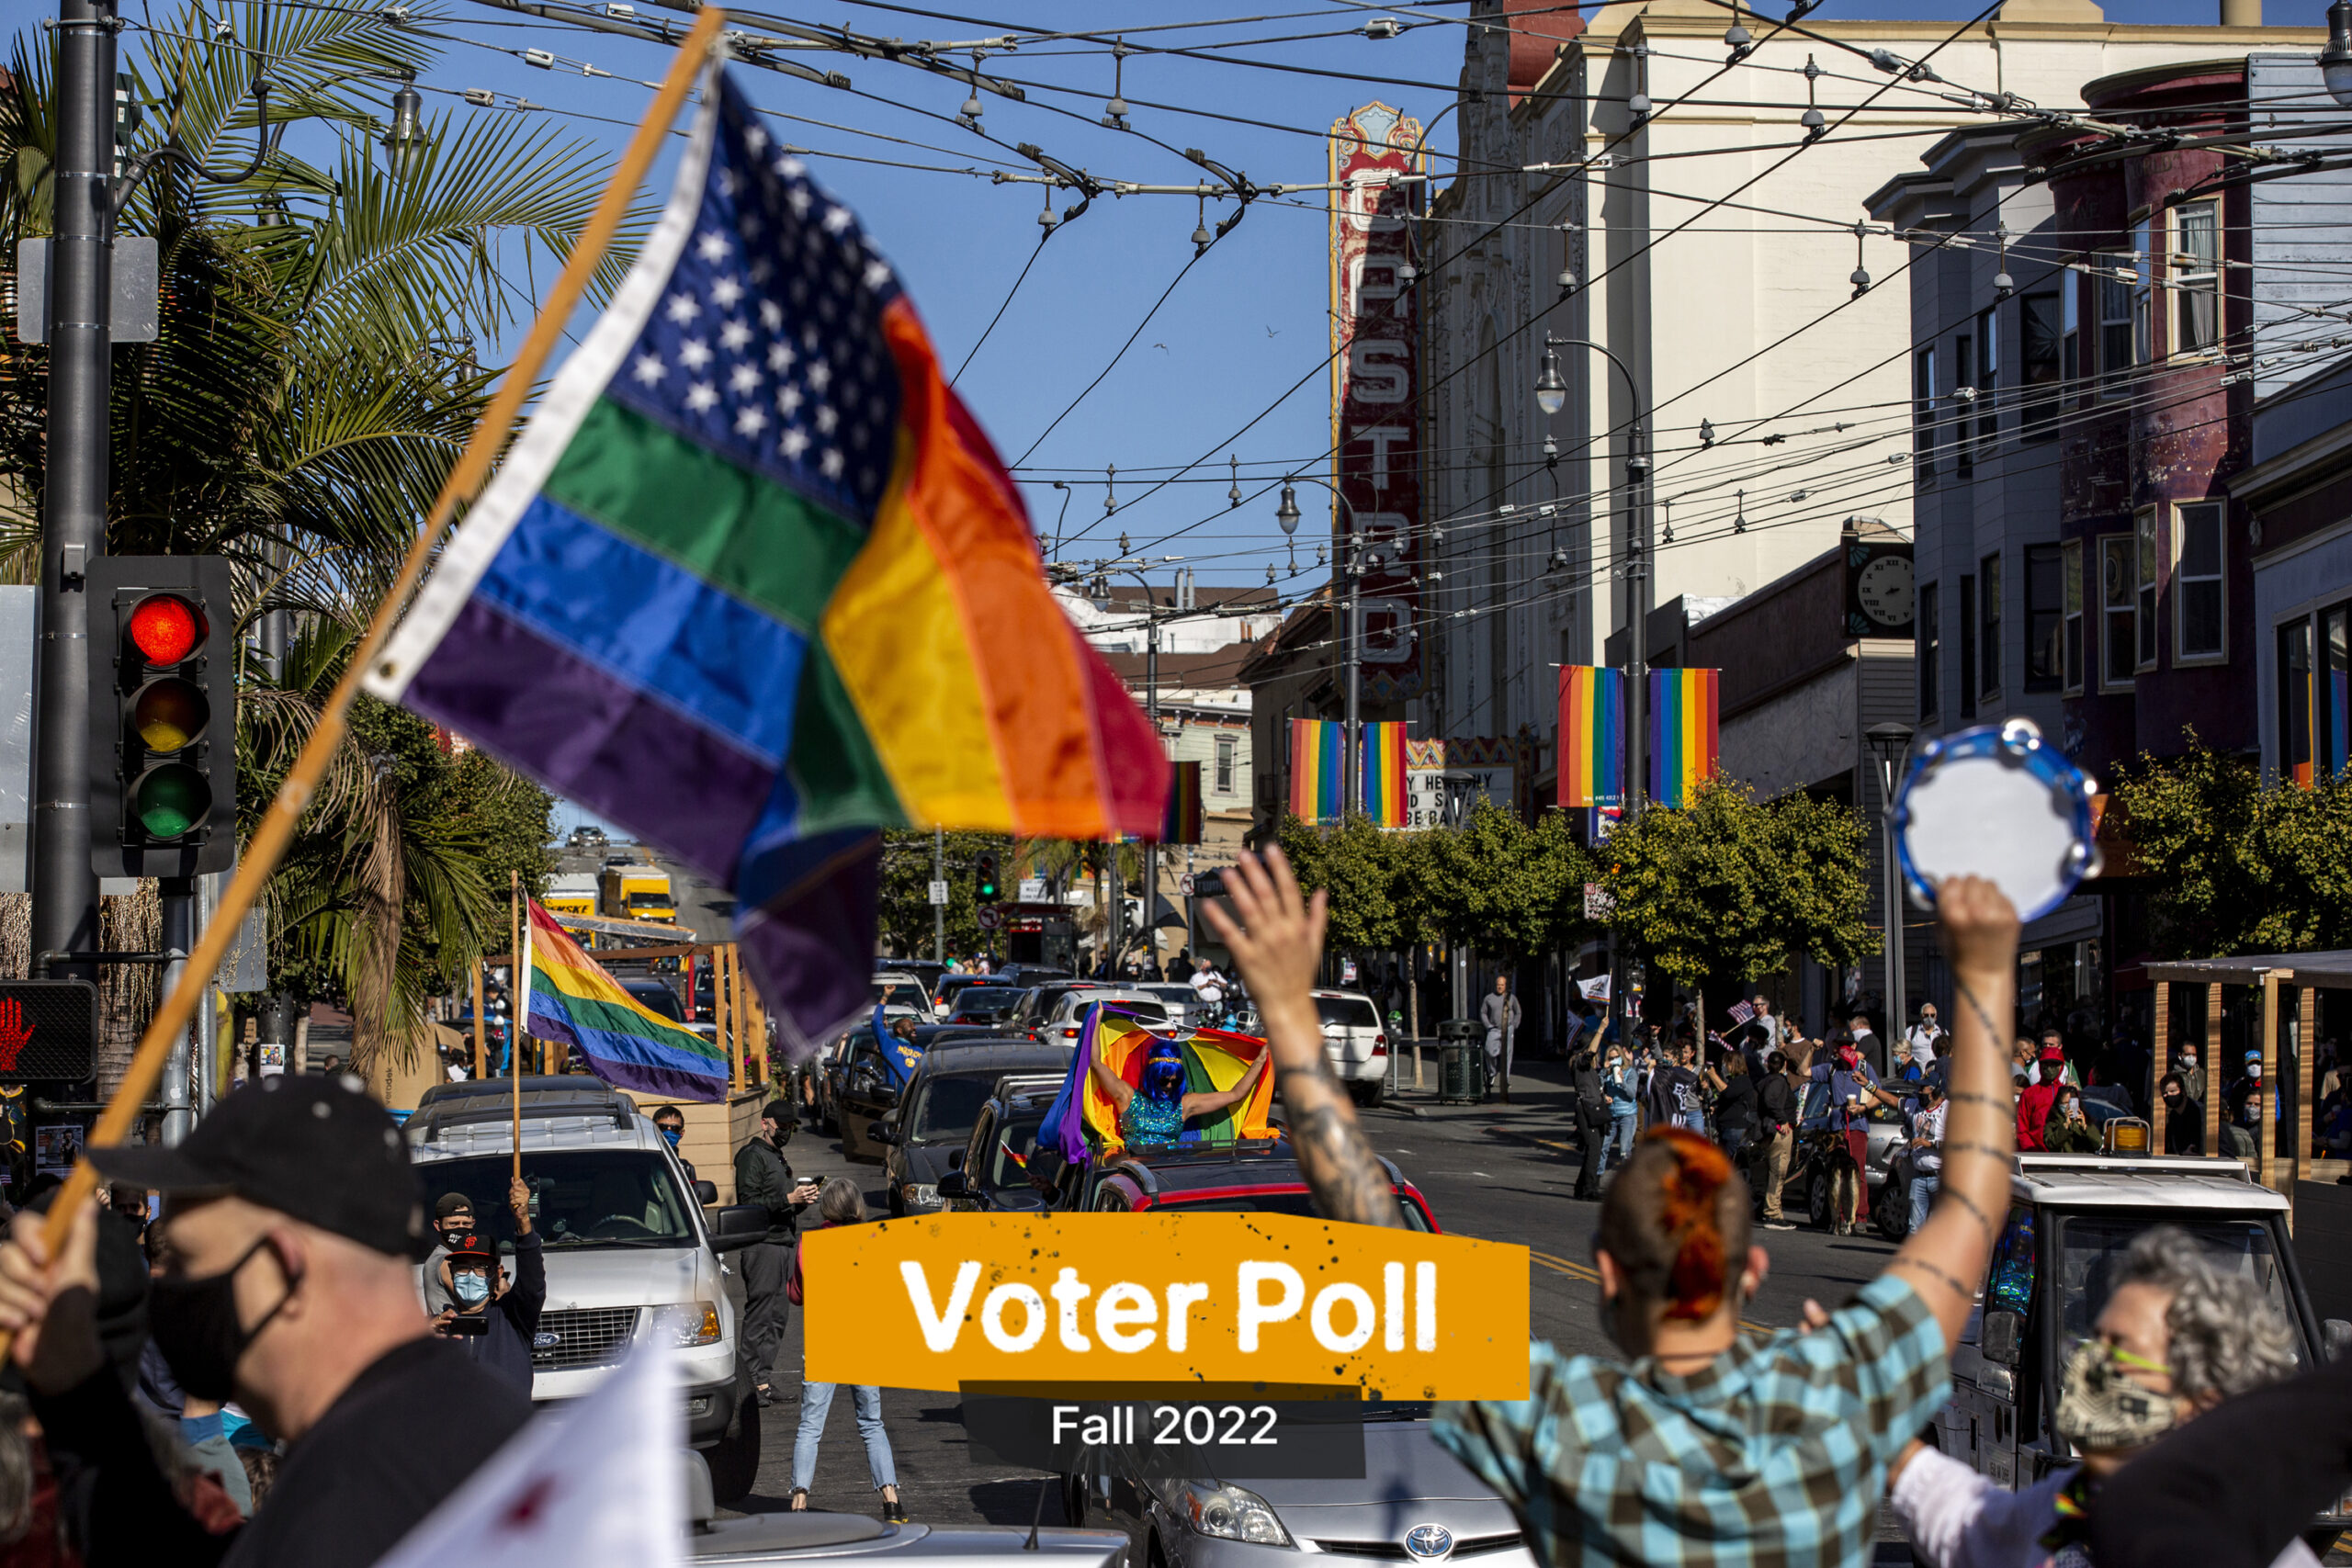 Image of Castro Street, with a gay pride rainbow/american flag flying on the left side. A person with a red mohawk holds a tambourine up as they look down the street towards cars.